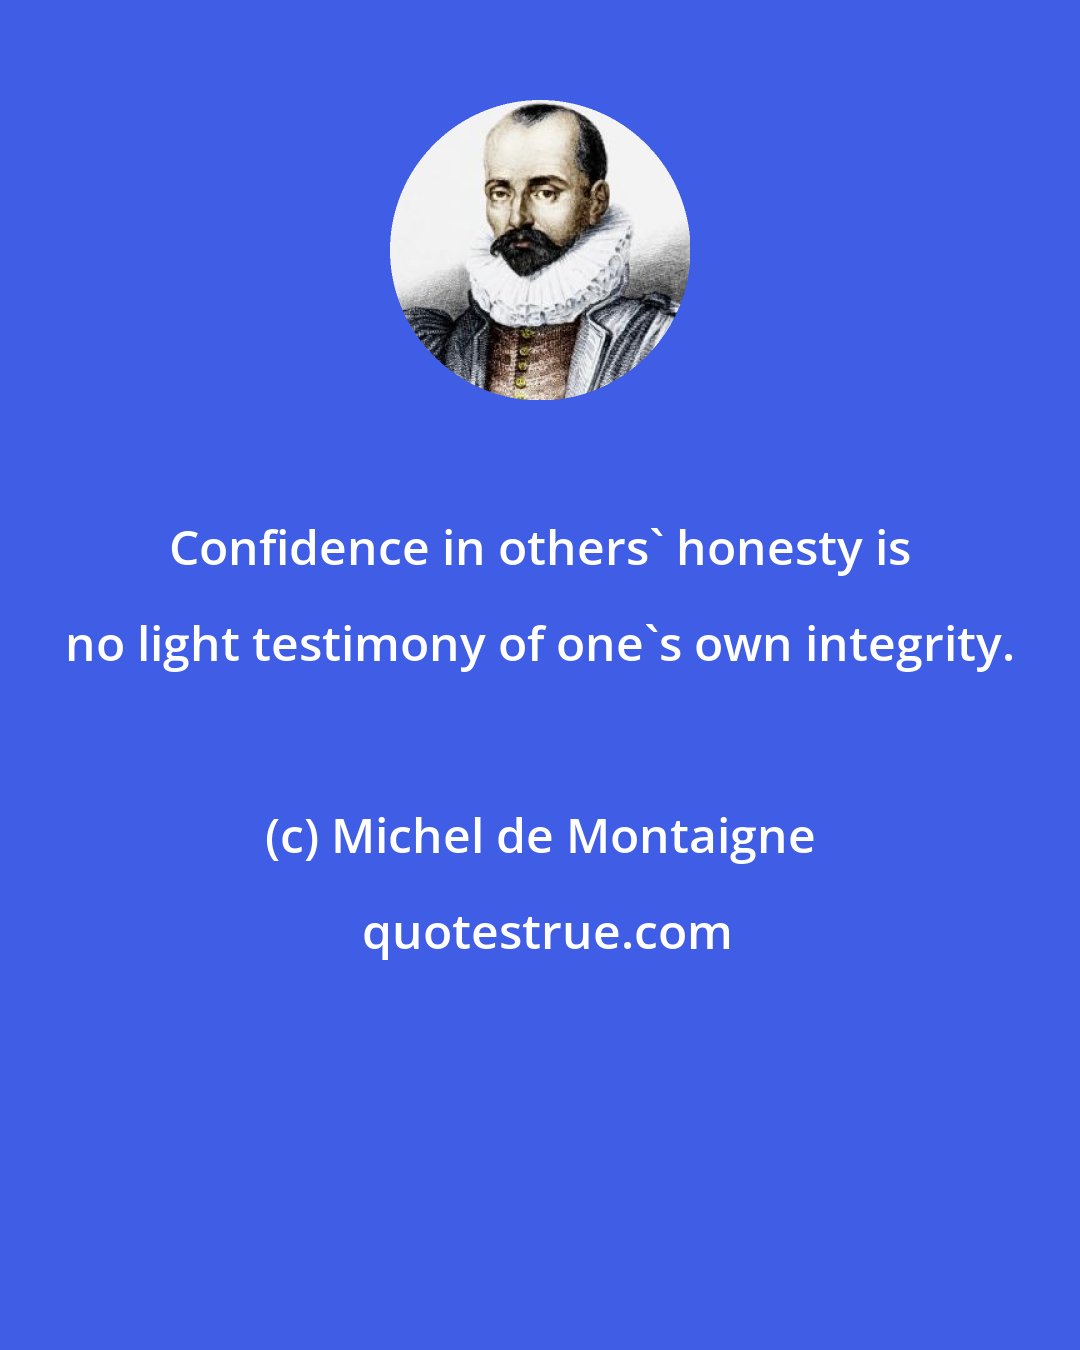 Michel de Montaigne: Confidence in others' honesty is no light testimony of one's own integrity.